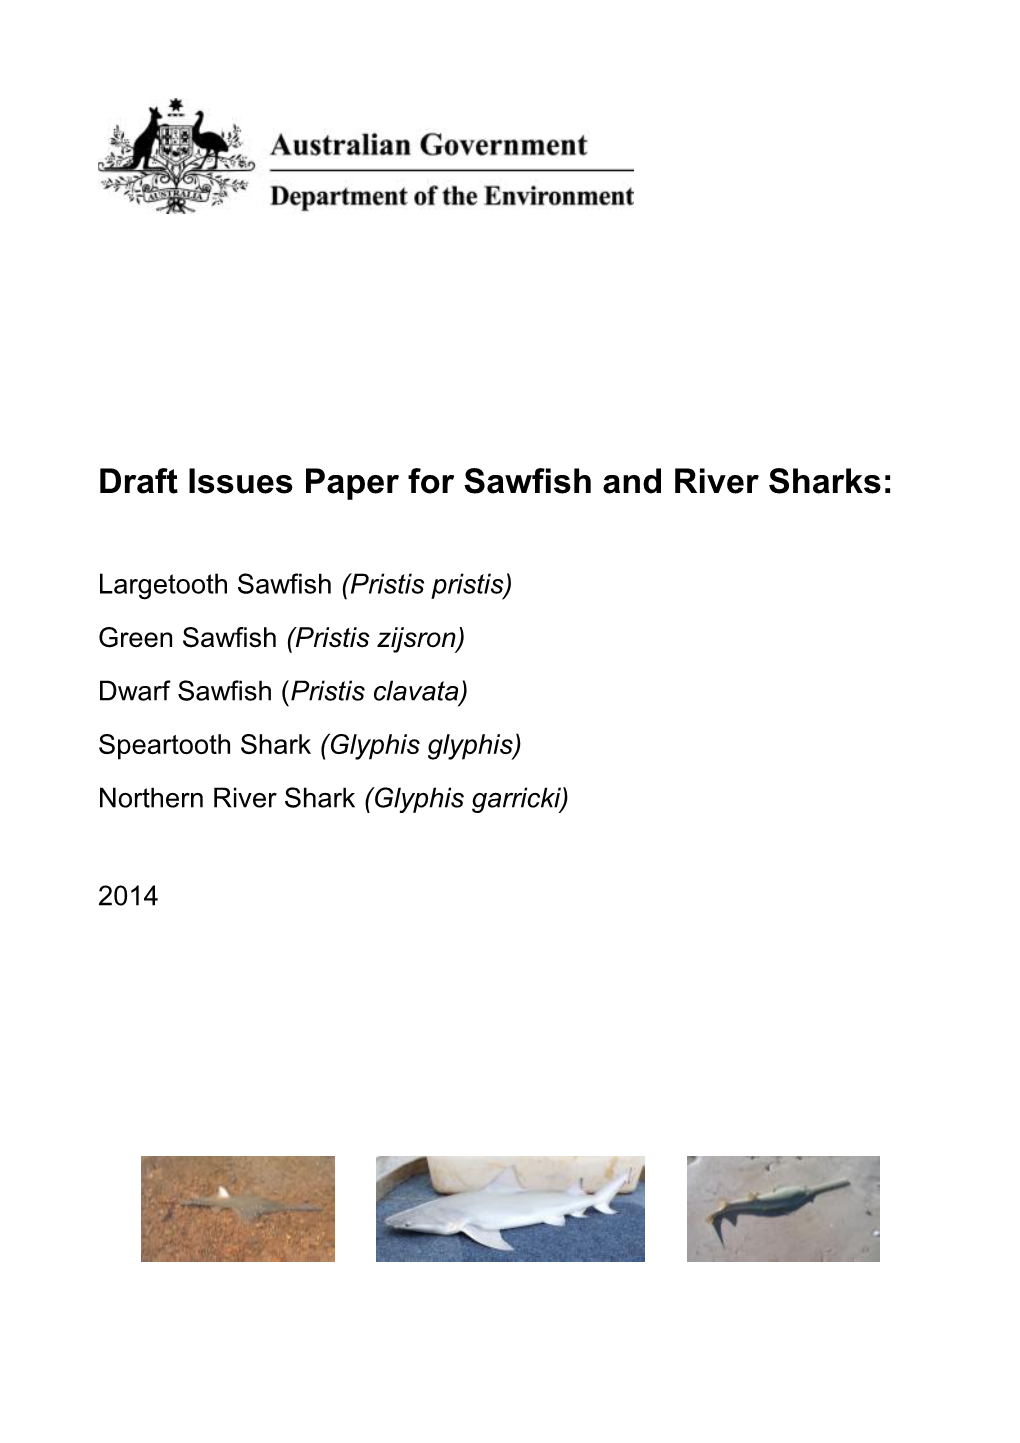 Draft Issues Paper for Sawfish and River Sharks: Largetooth Sawfish (Pristis Pristis) Green